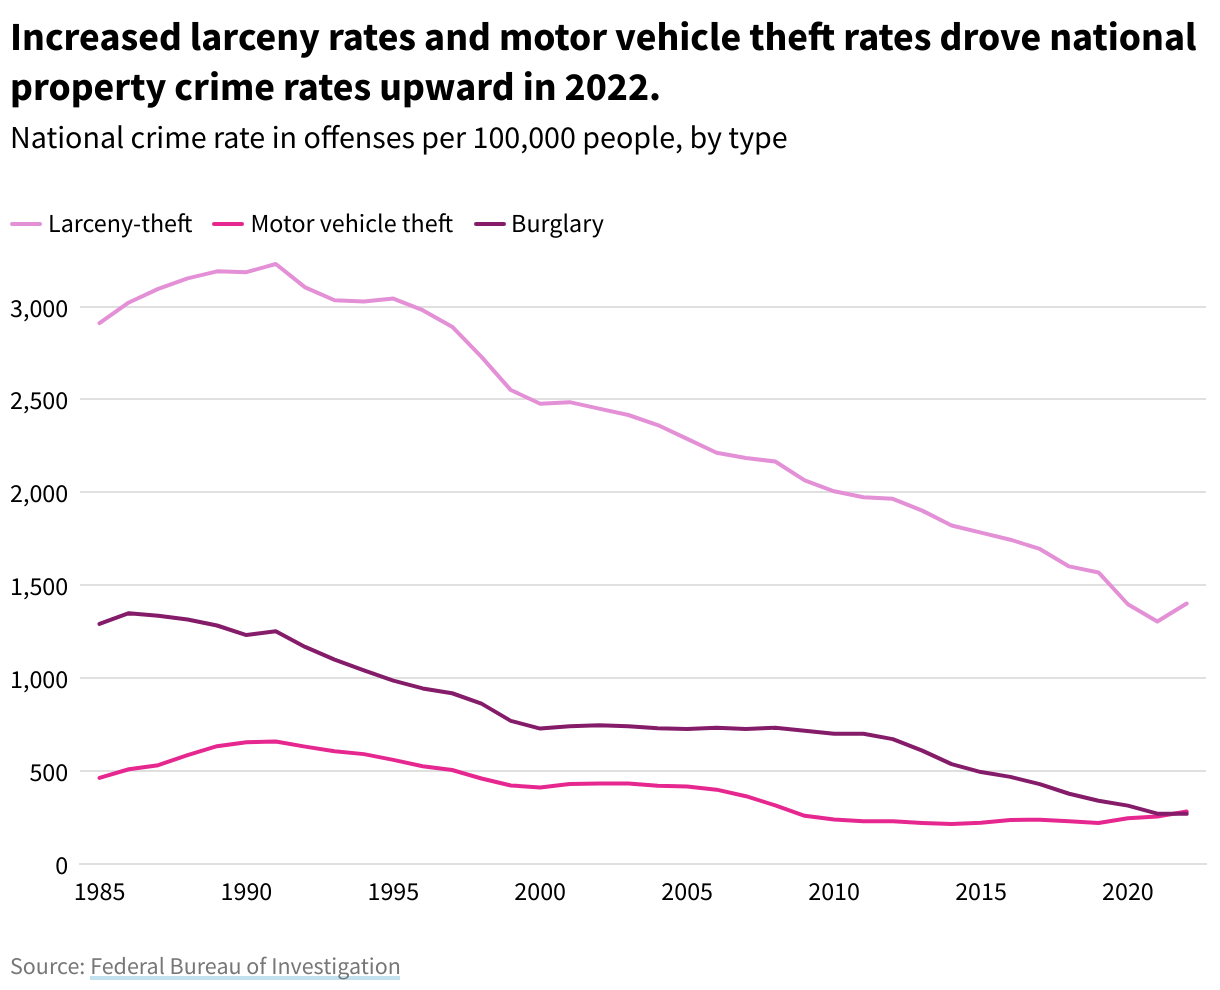 A line chart showing the annual national crime rate in offenses per 100,000 people by crime type. Increased larceny rates and motor vehicle theft rates drove national property crime rates upward in 2022.